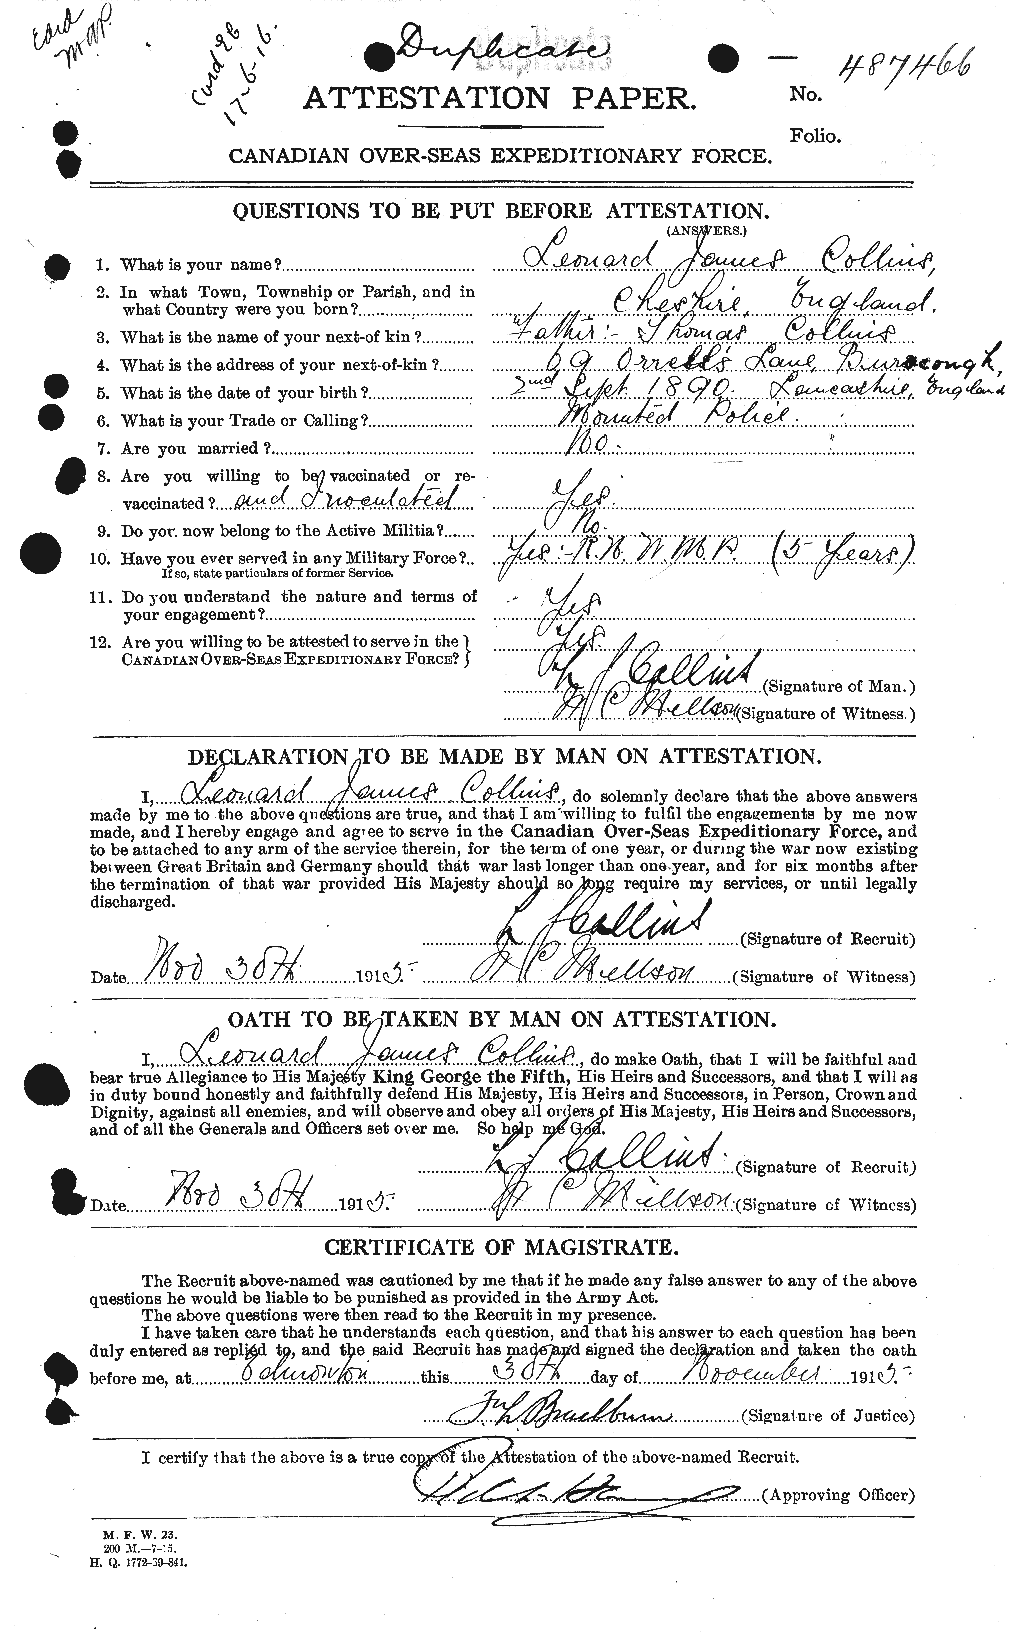 Personnel Records of the First World War - CEF 069498a